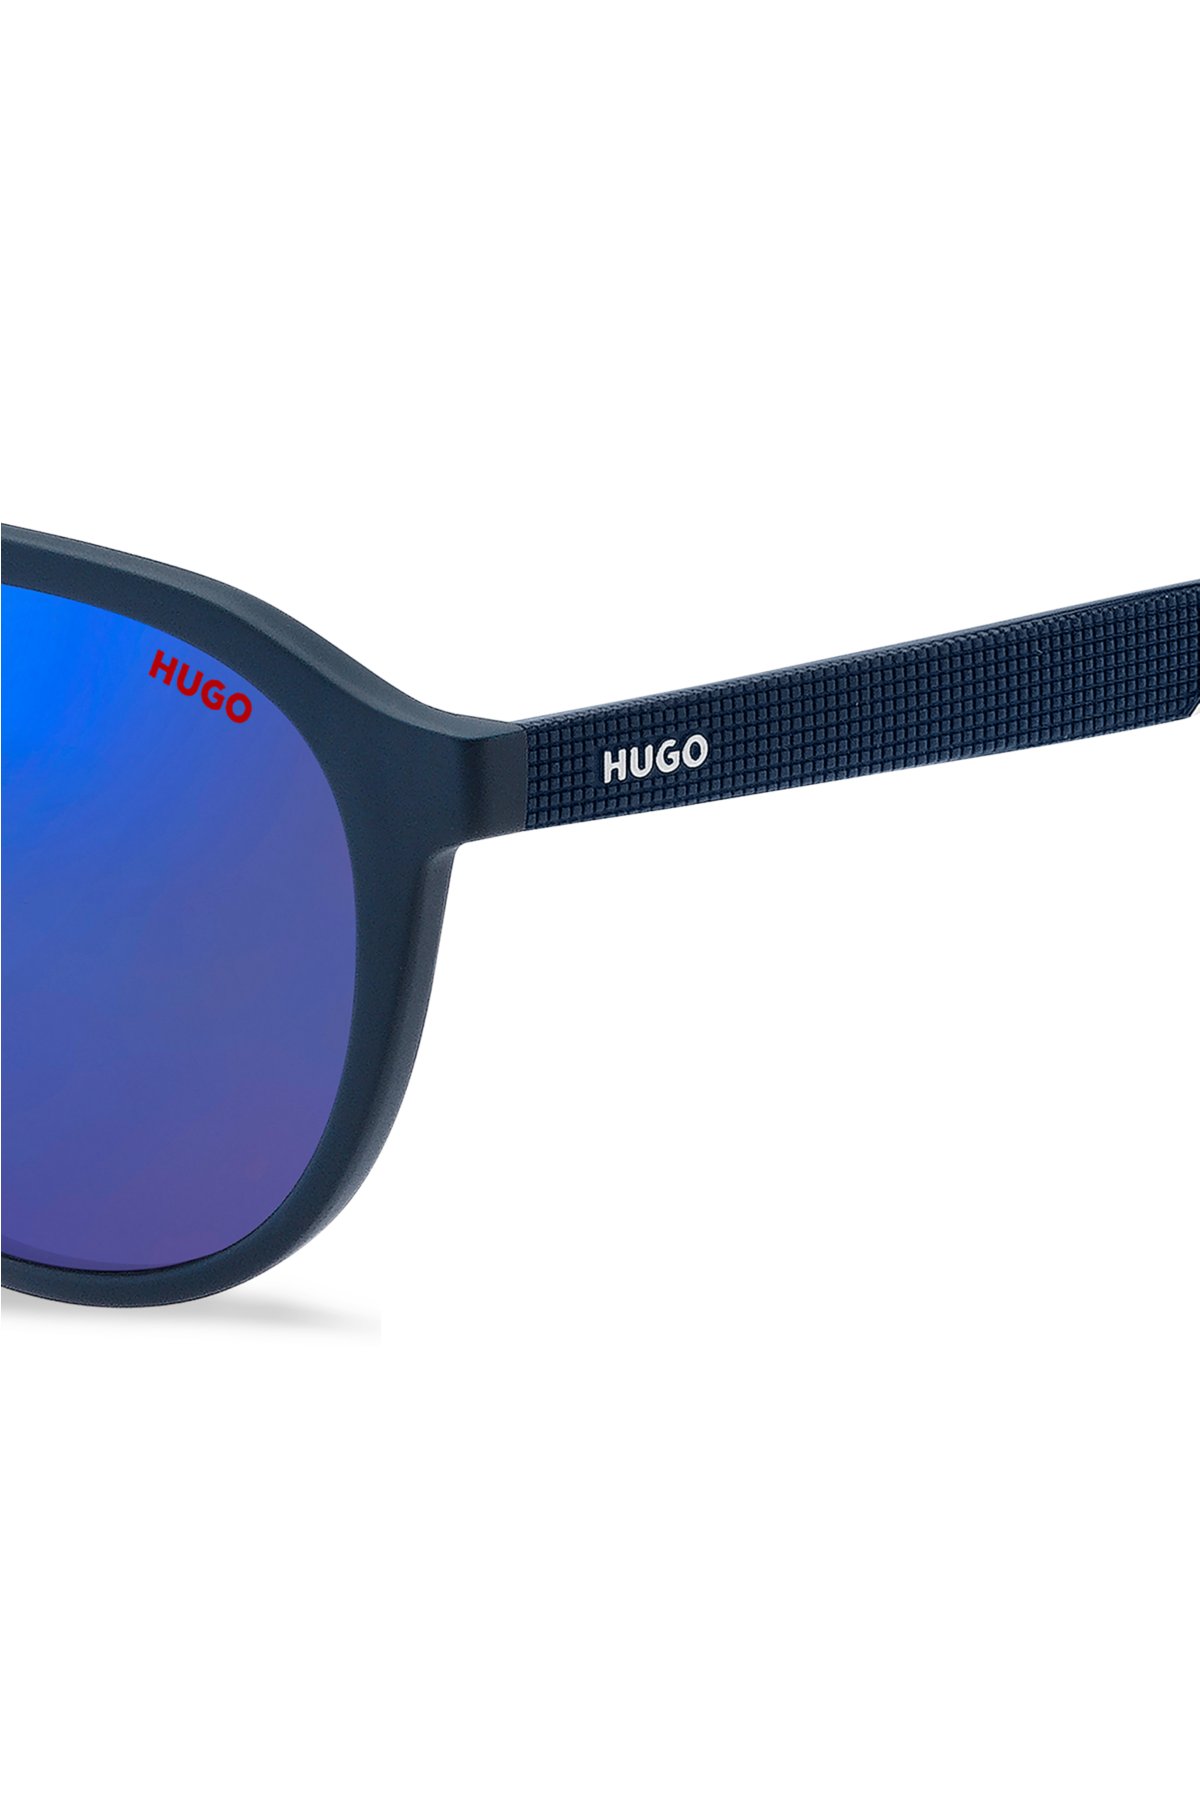 Navy-acetate sunglasses with blue lenses and patterned temples, Blue